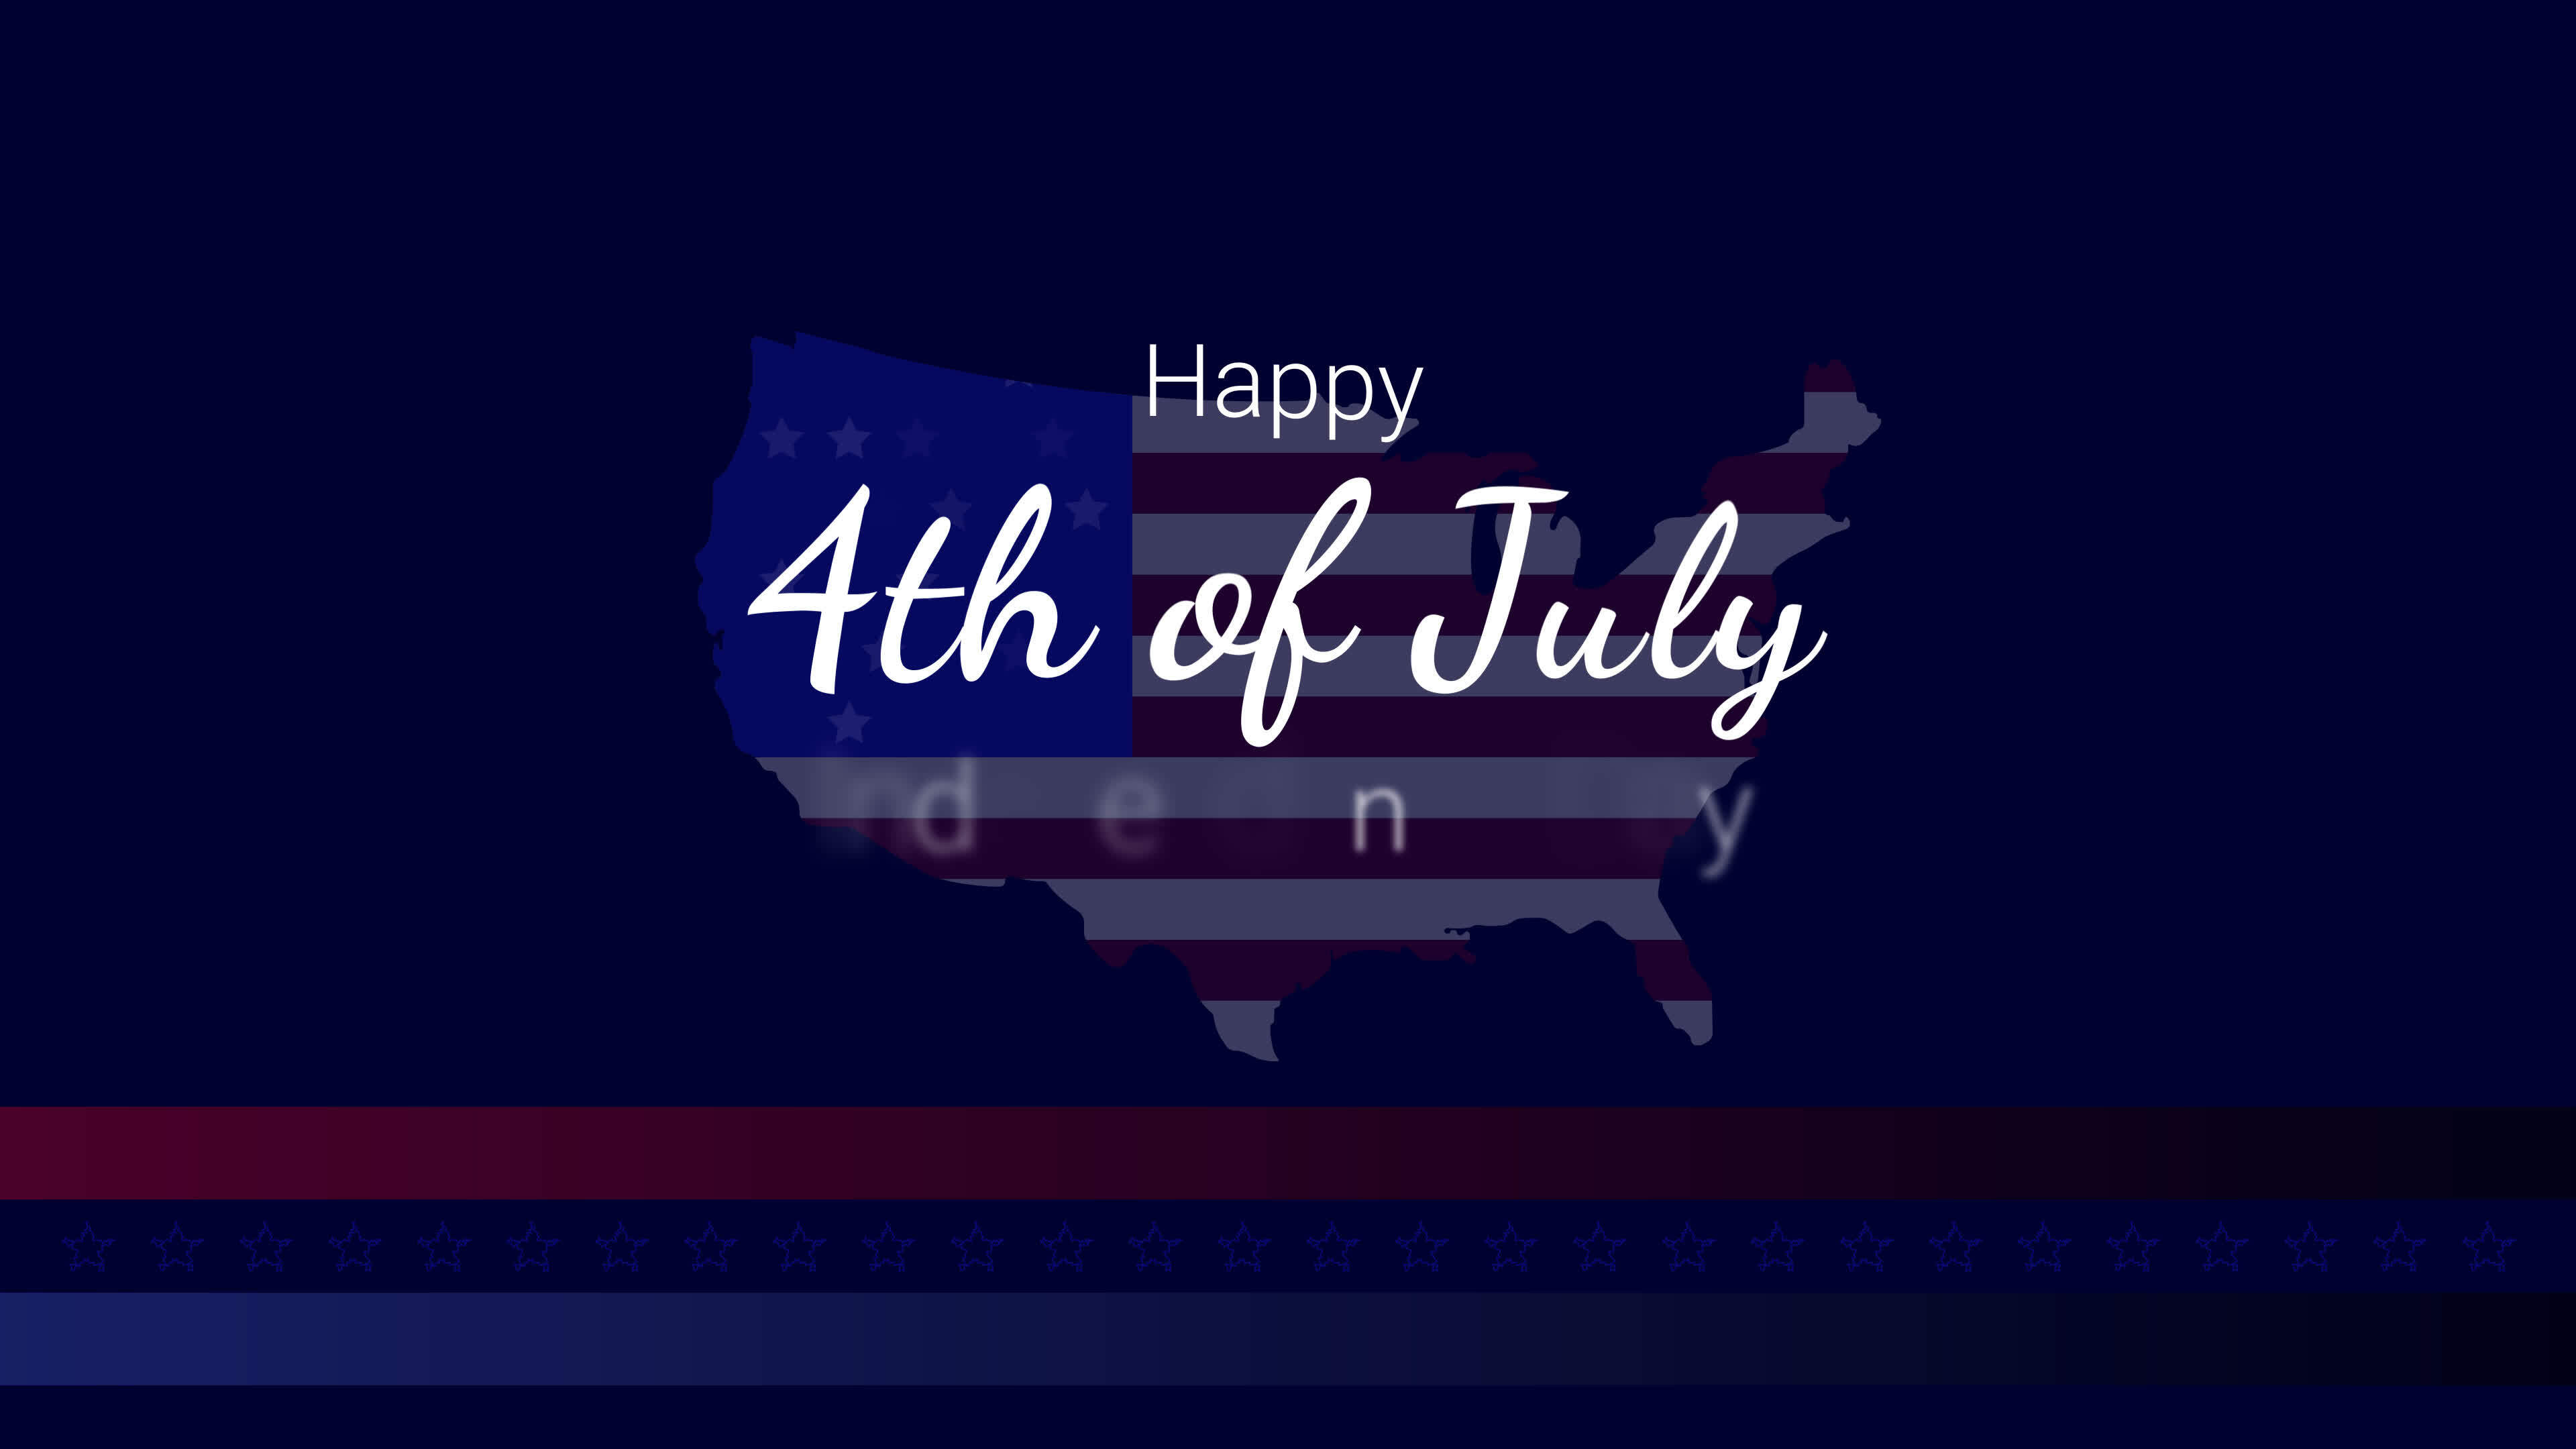 andy hastie share animated 4th of july photos